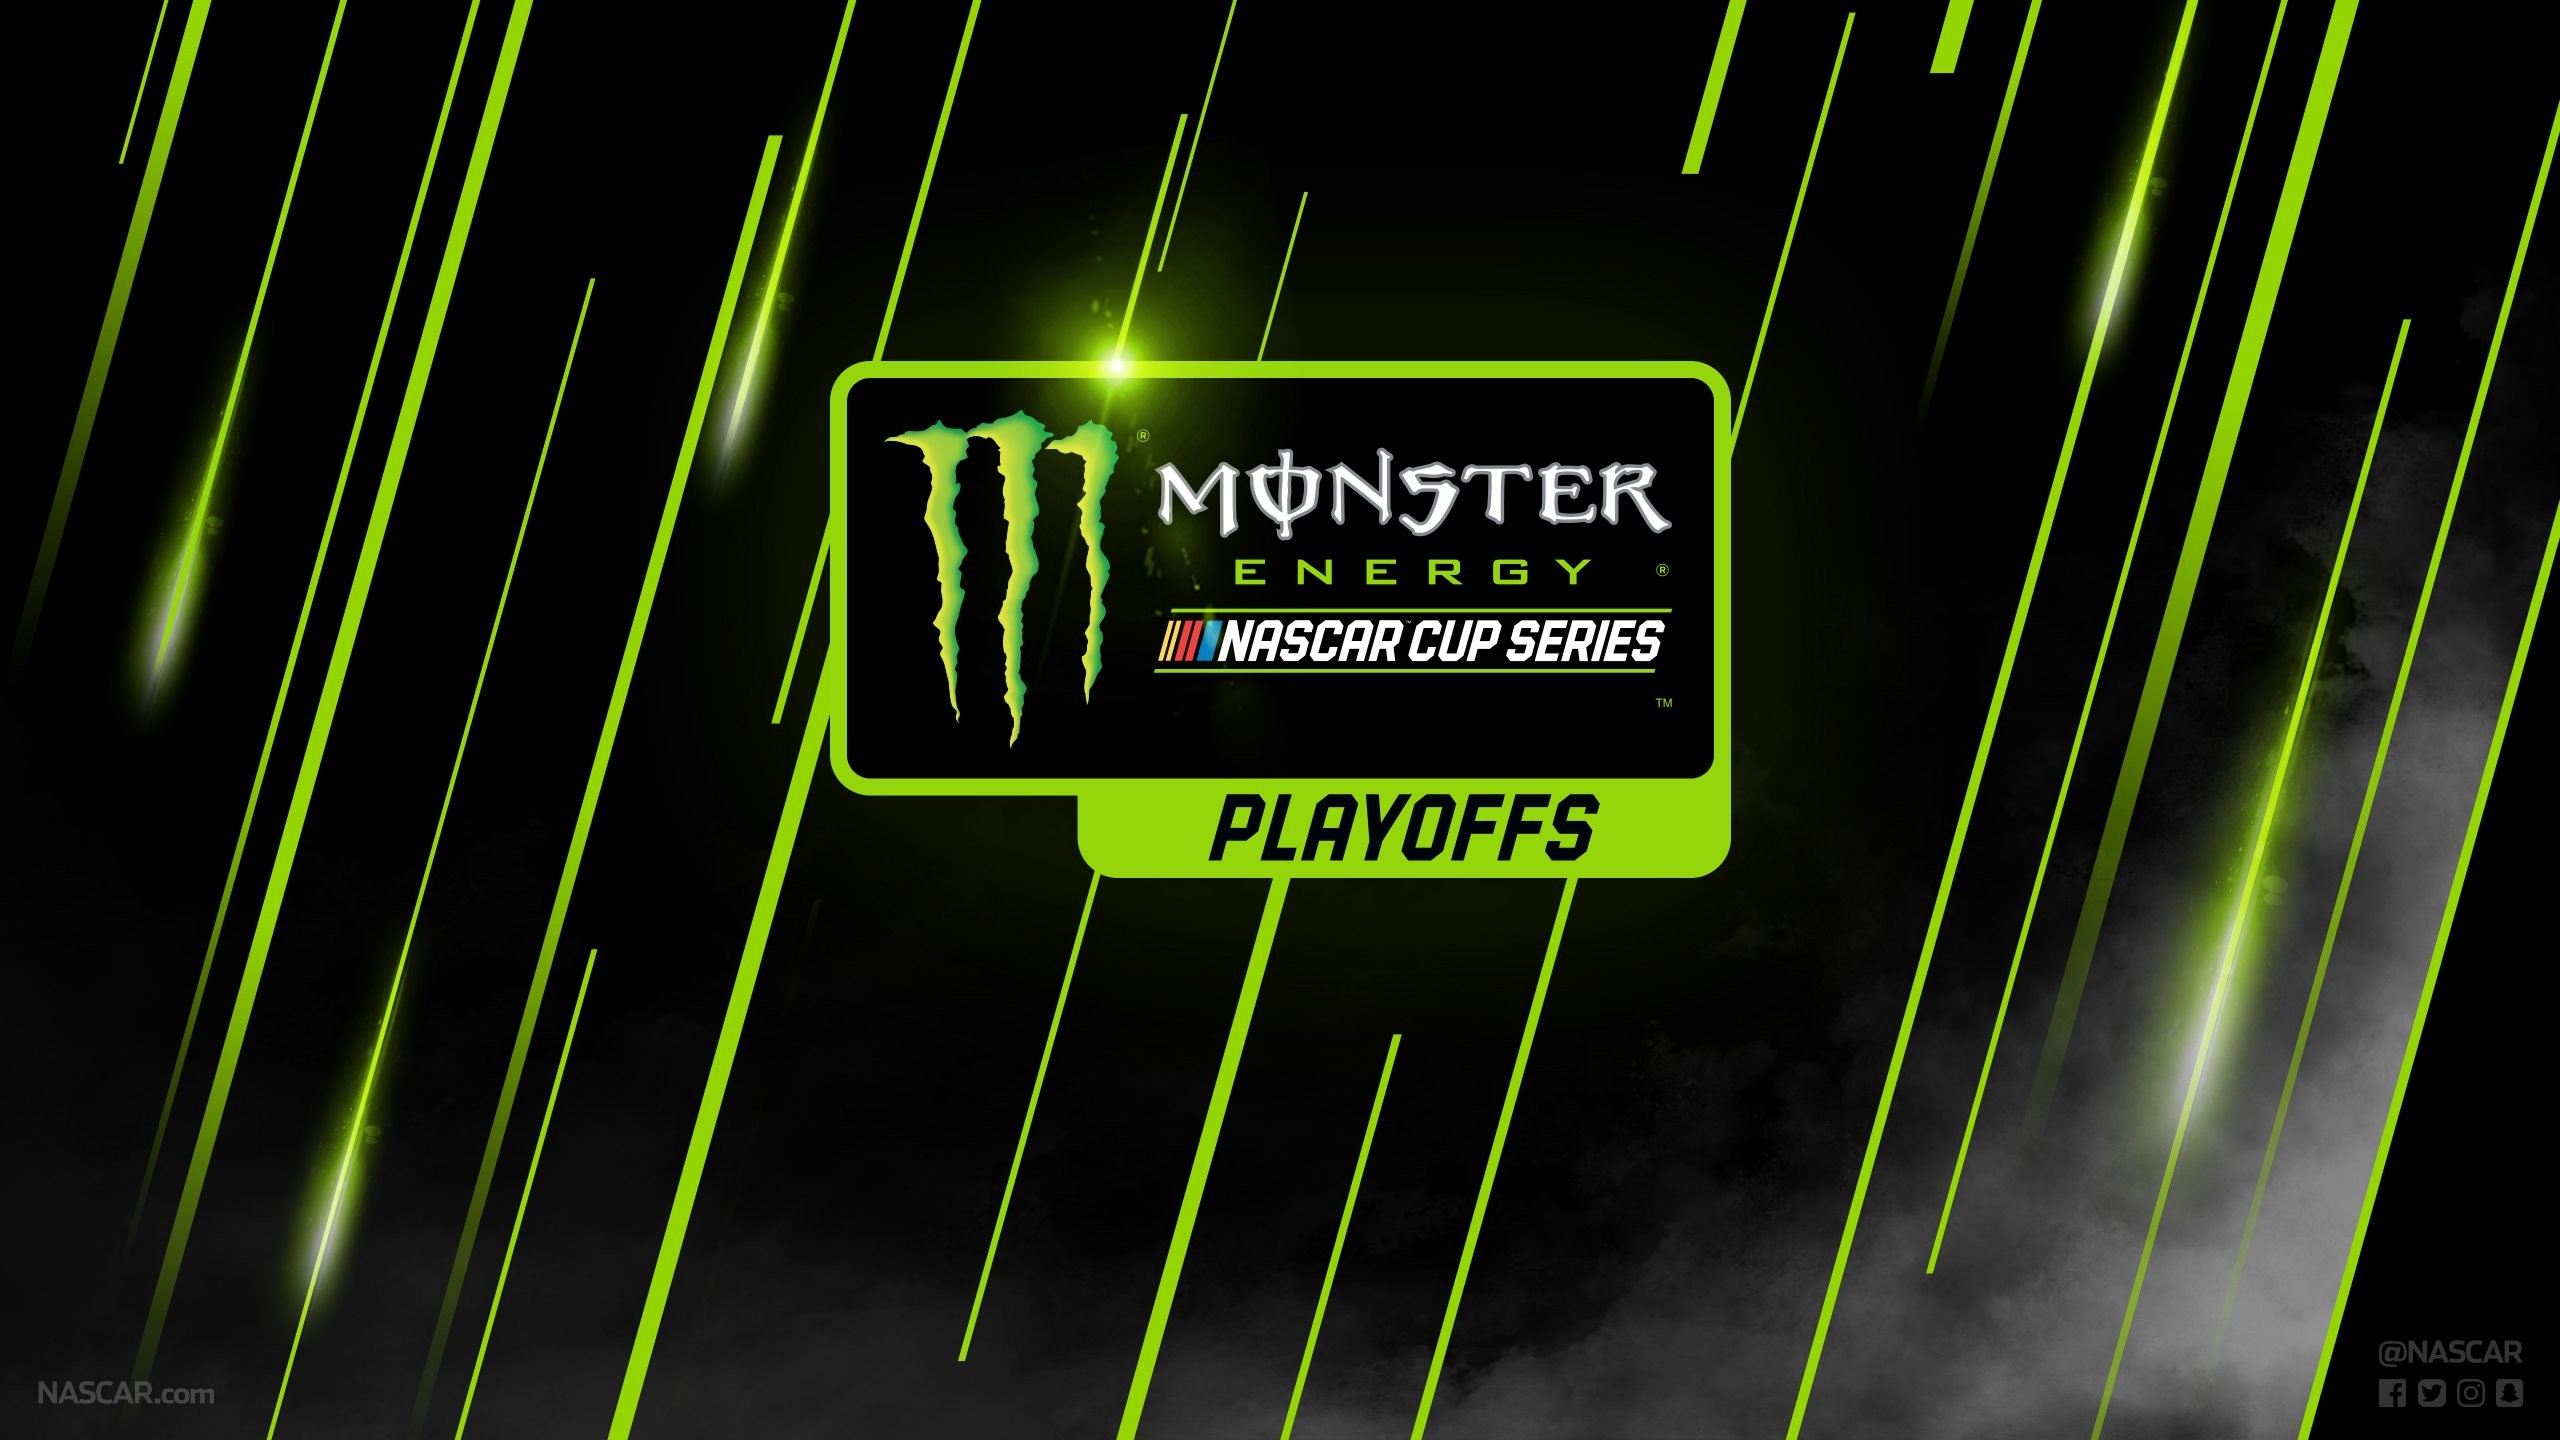 2560x1440 Monster Energy NASCAR Cup Series Playoffs